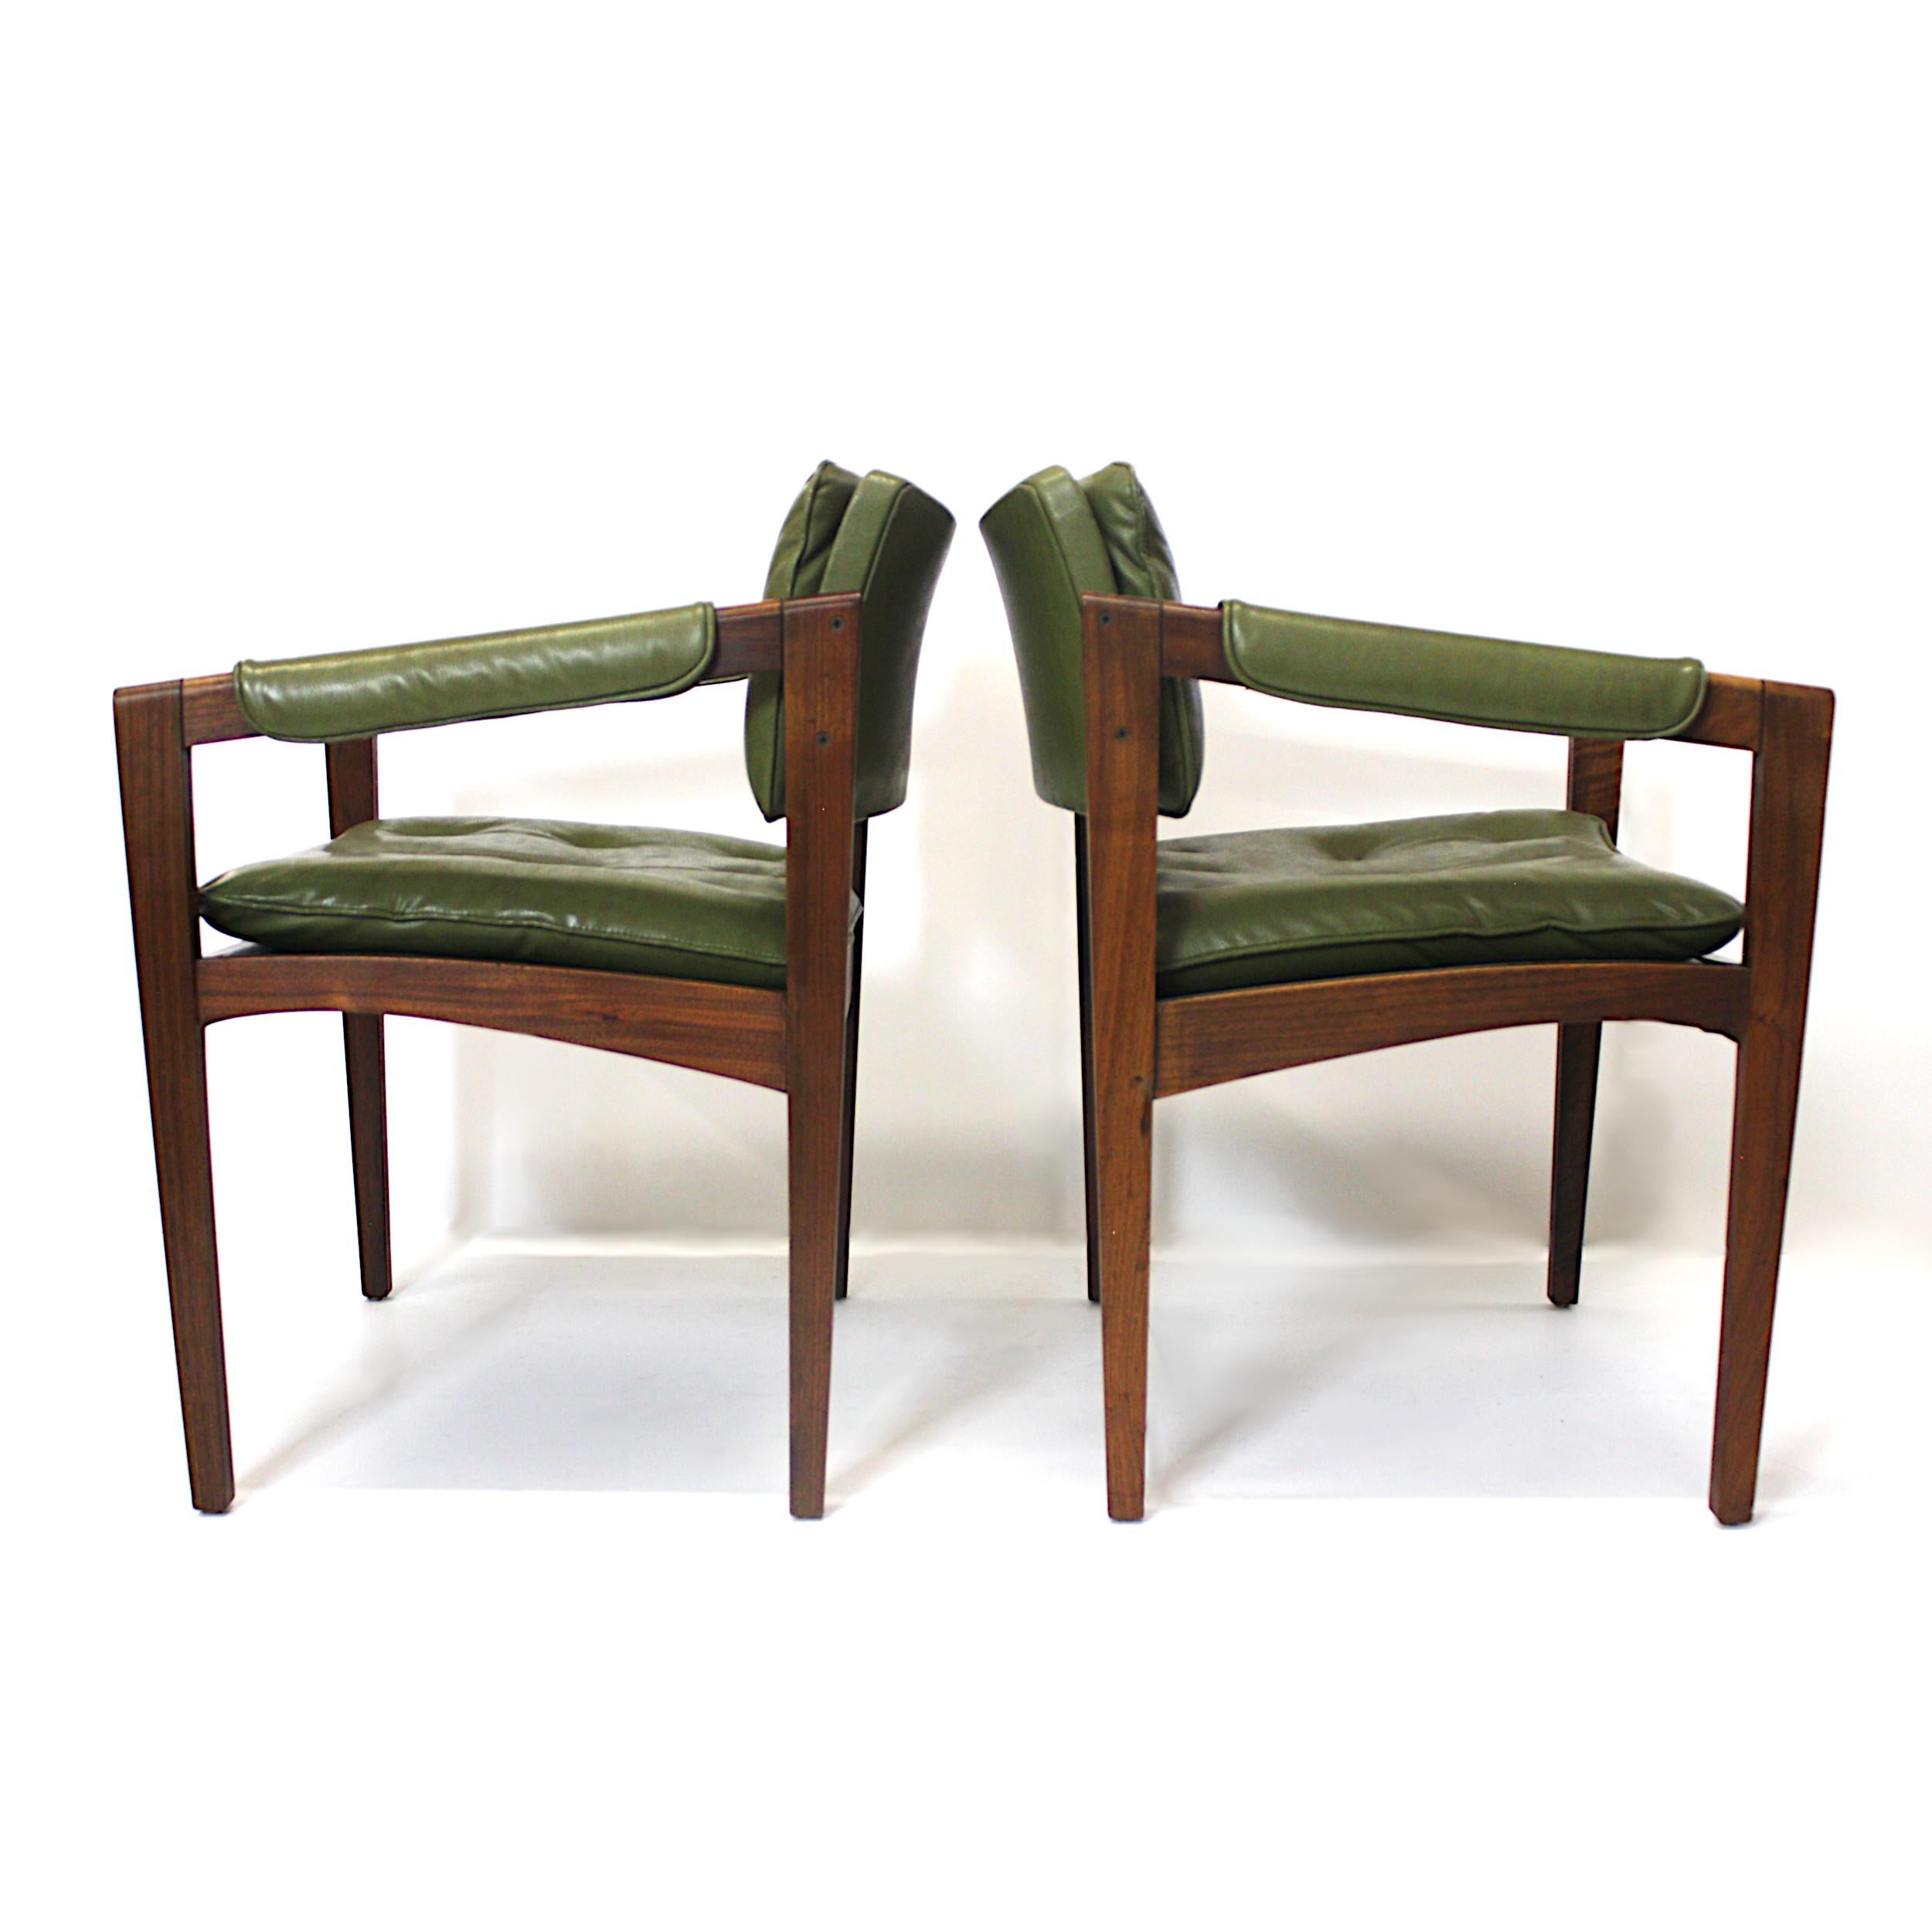 Mid-20th Century Unusual Pair of Green Mid-Century Modern Lounge Chairs by Glenn of California